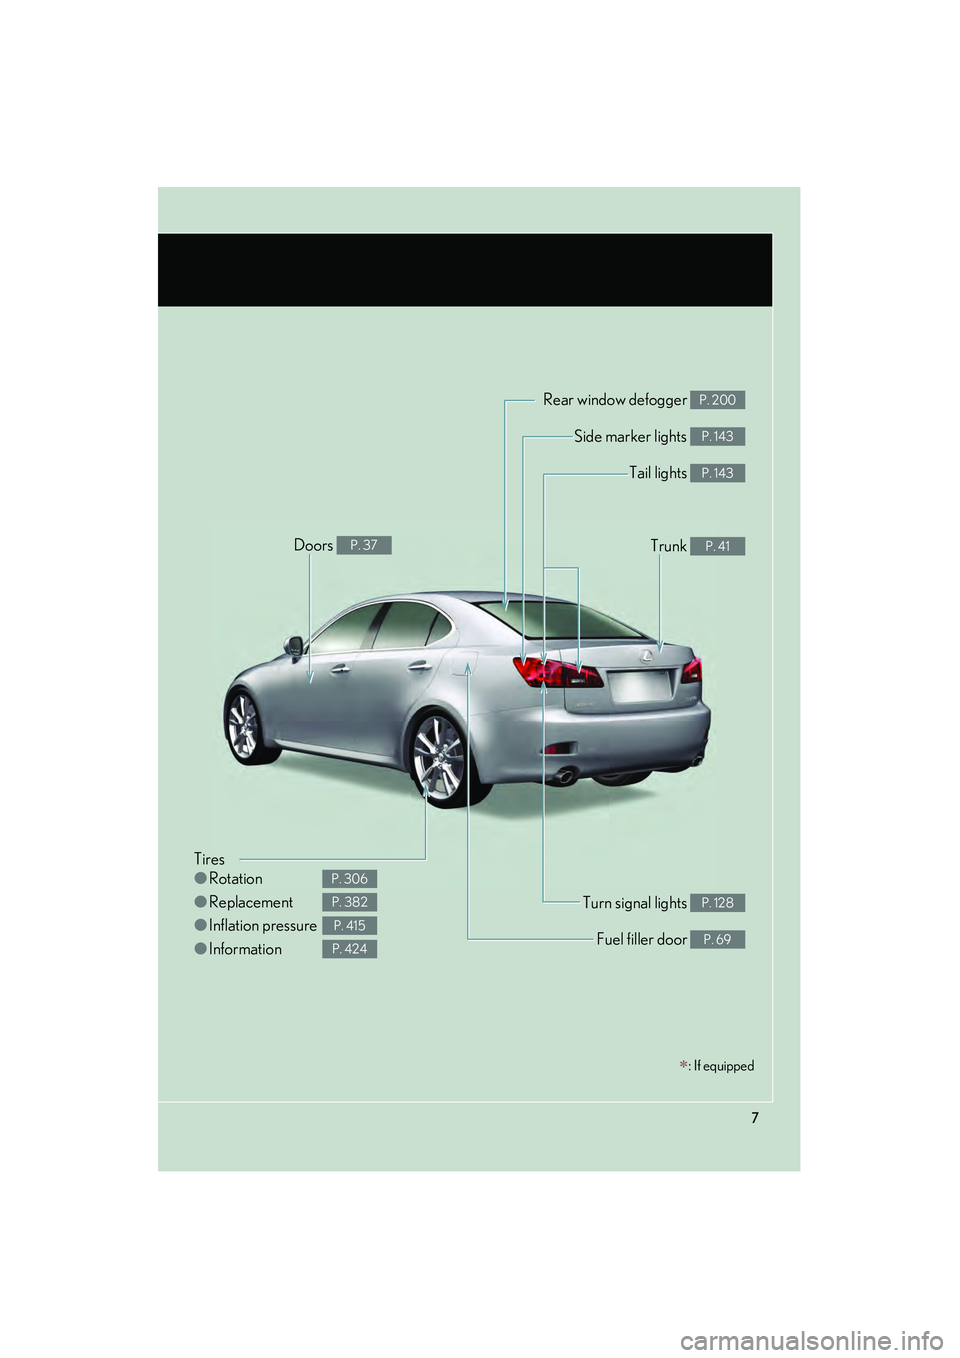 Lexus IS250 2008  Owners Manual 08_IS350/250_U_(L/O_0708)
7
∗: If equipped
Tires
●Rotation
● Replacement
● Inflation pressure
● Information
P. 306
P. 382
P. 415
P. 424
Tail lights P. 143
Side marker lights P. 143
Trunk P. 